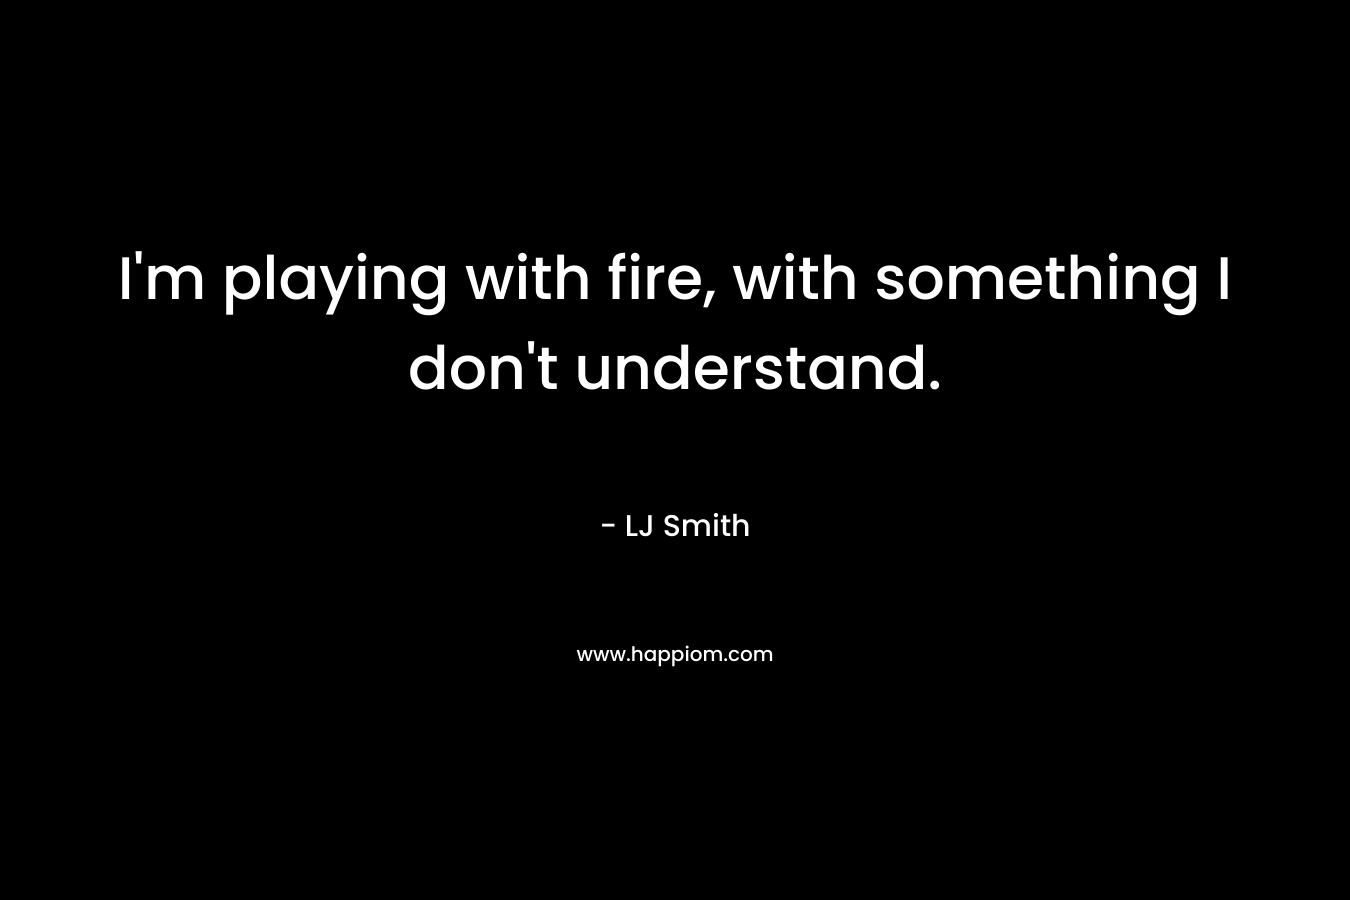 I’m playing with fire, with something I don’t understand. – LJ Smith